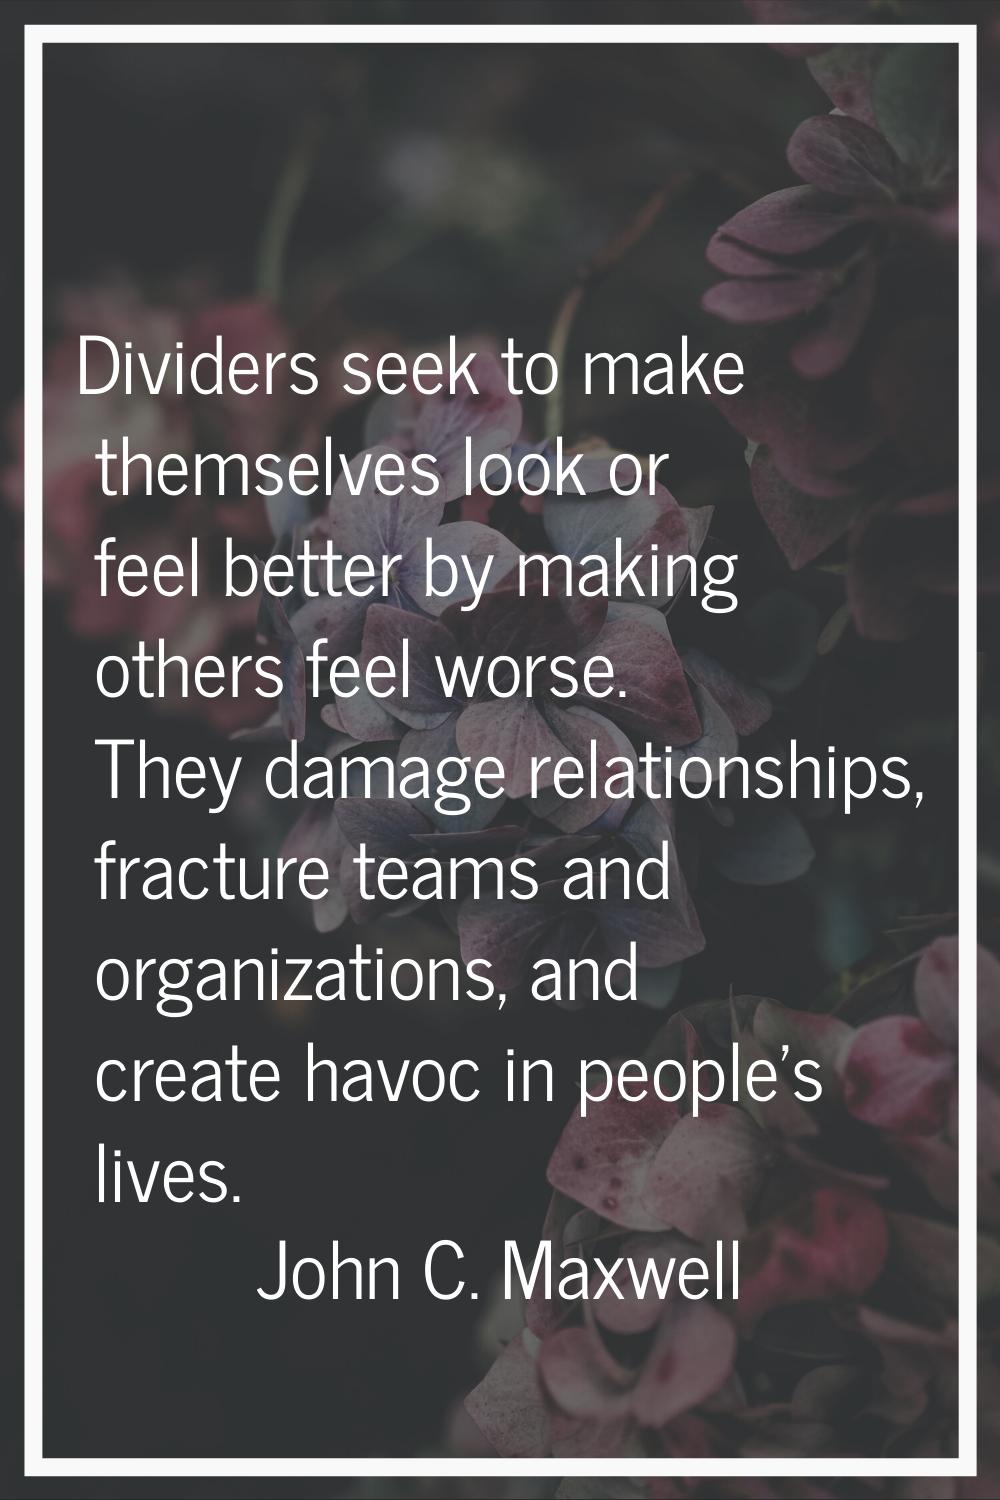 Dividers seek to make themselves look or feel better by making others feel worse. They damage relat